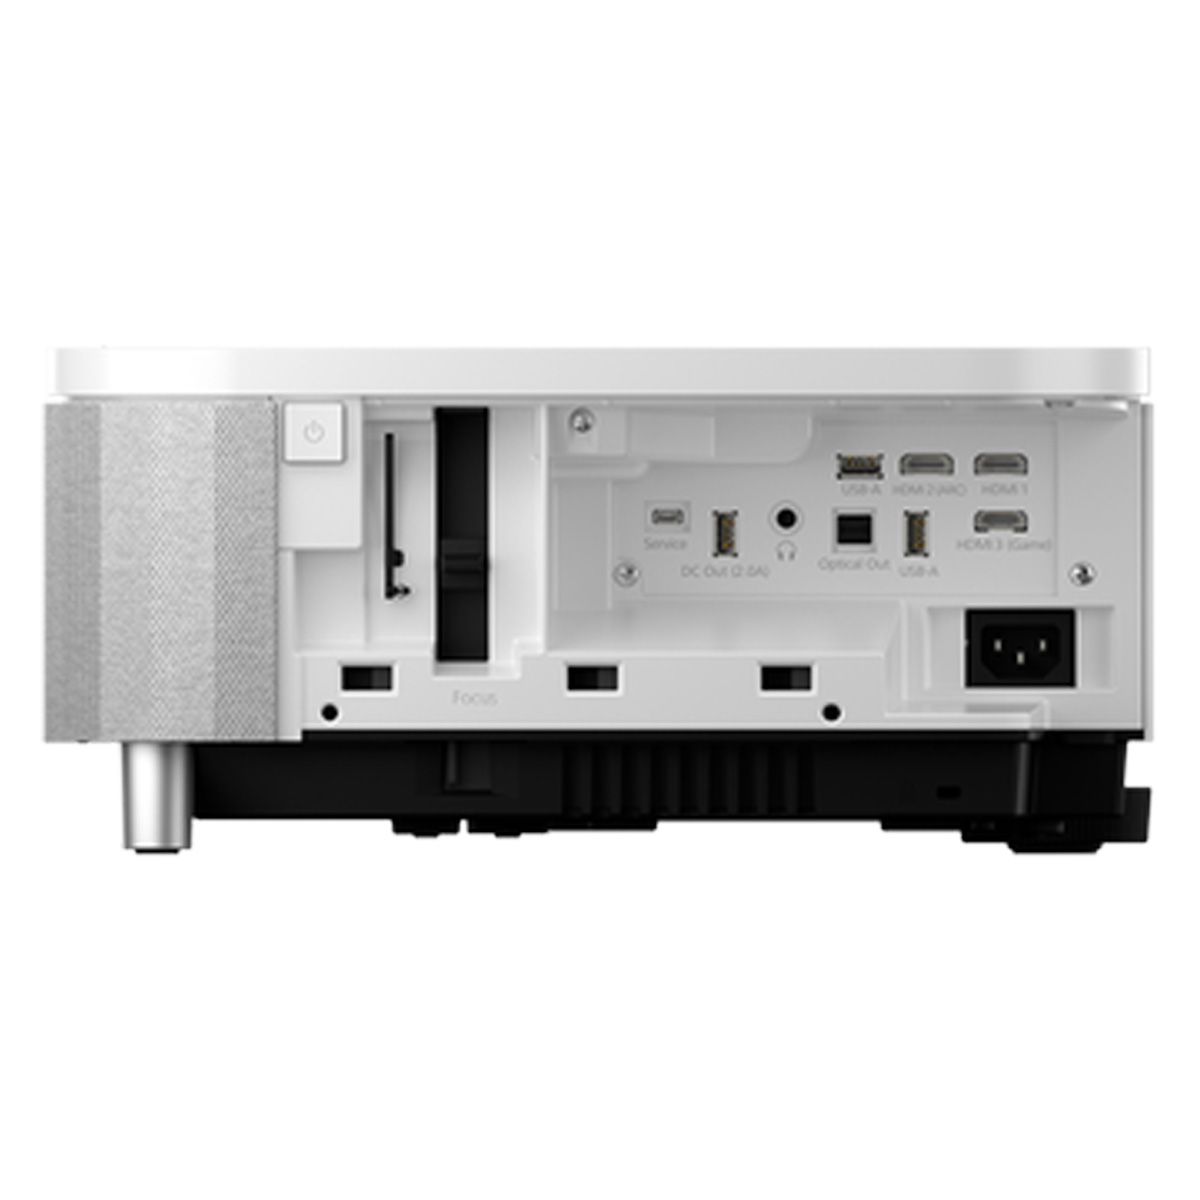 Epson LS800 Super Ultra Short Throw Projector - White - side view of inputs